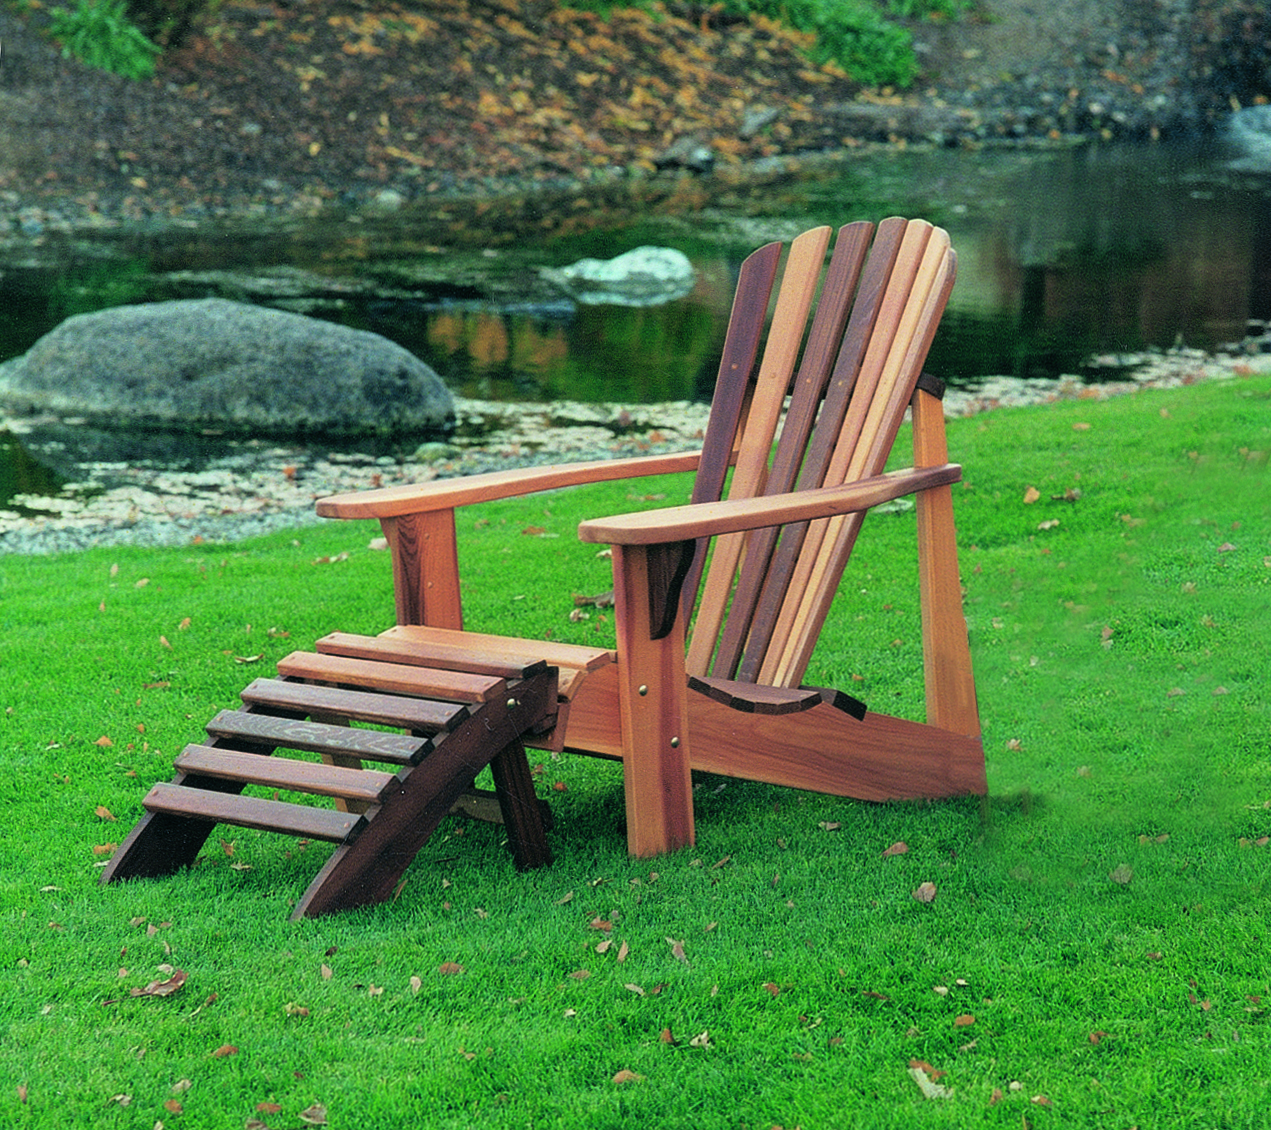 ADIRONDACK CHAIR FEATURES